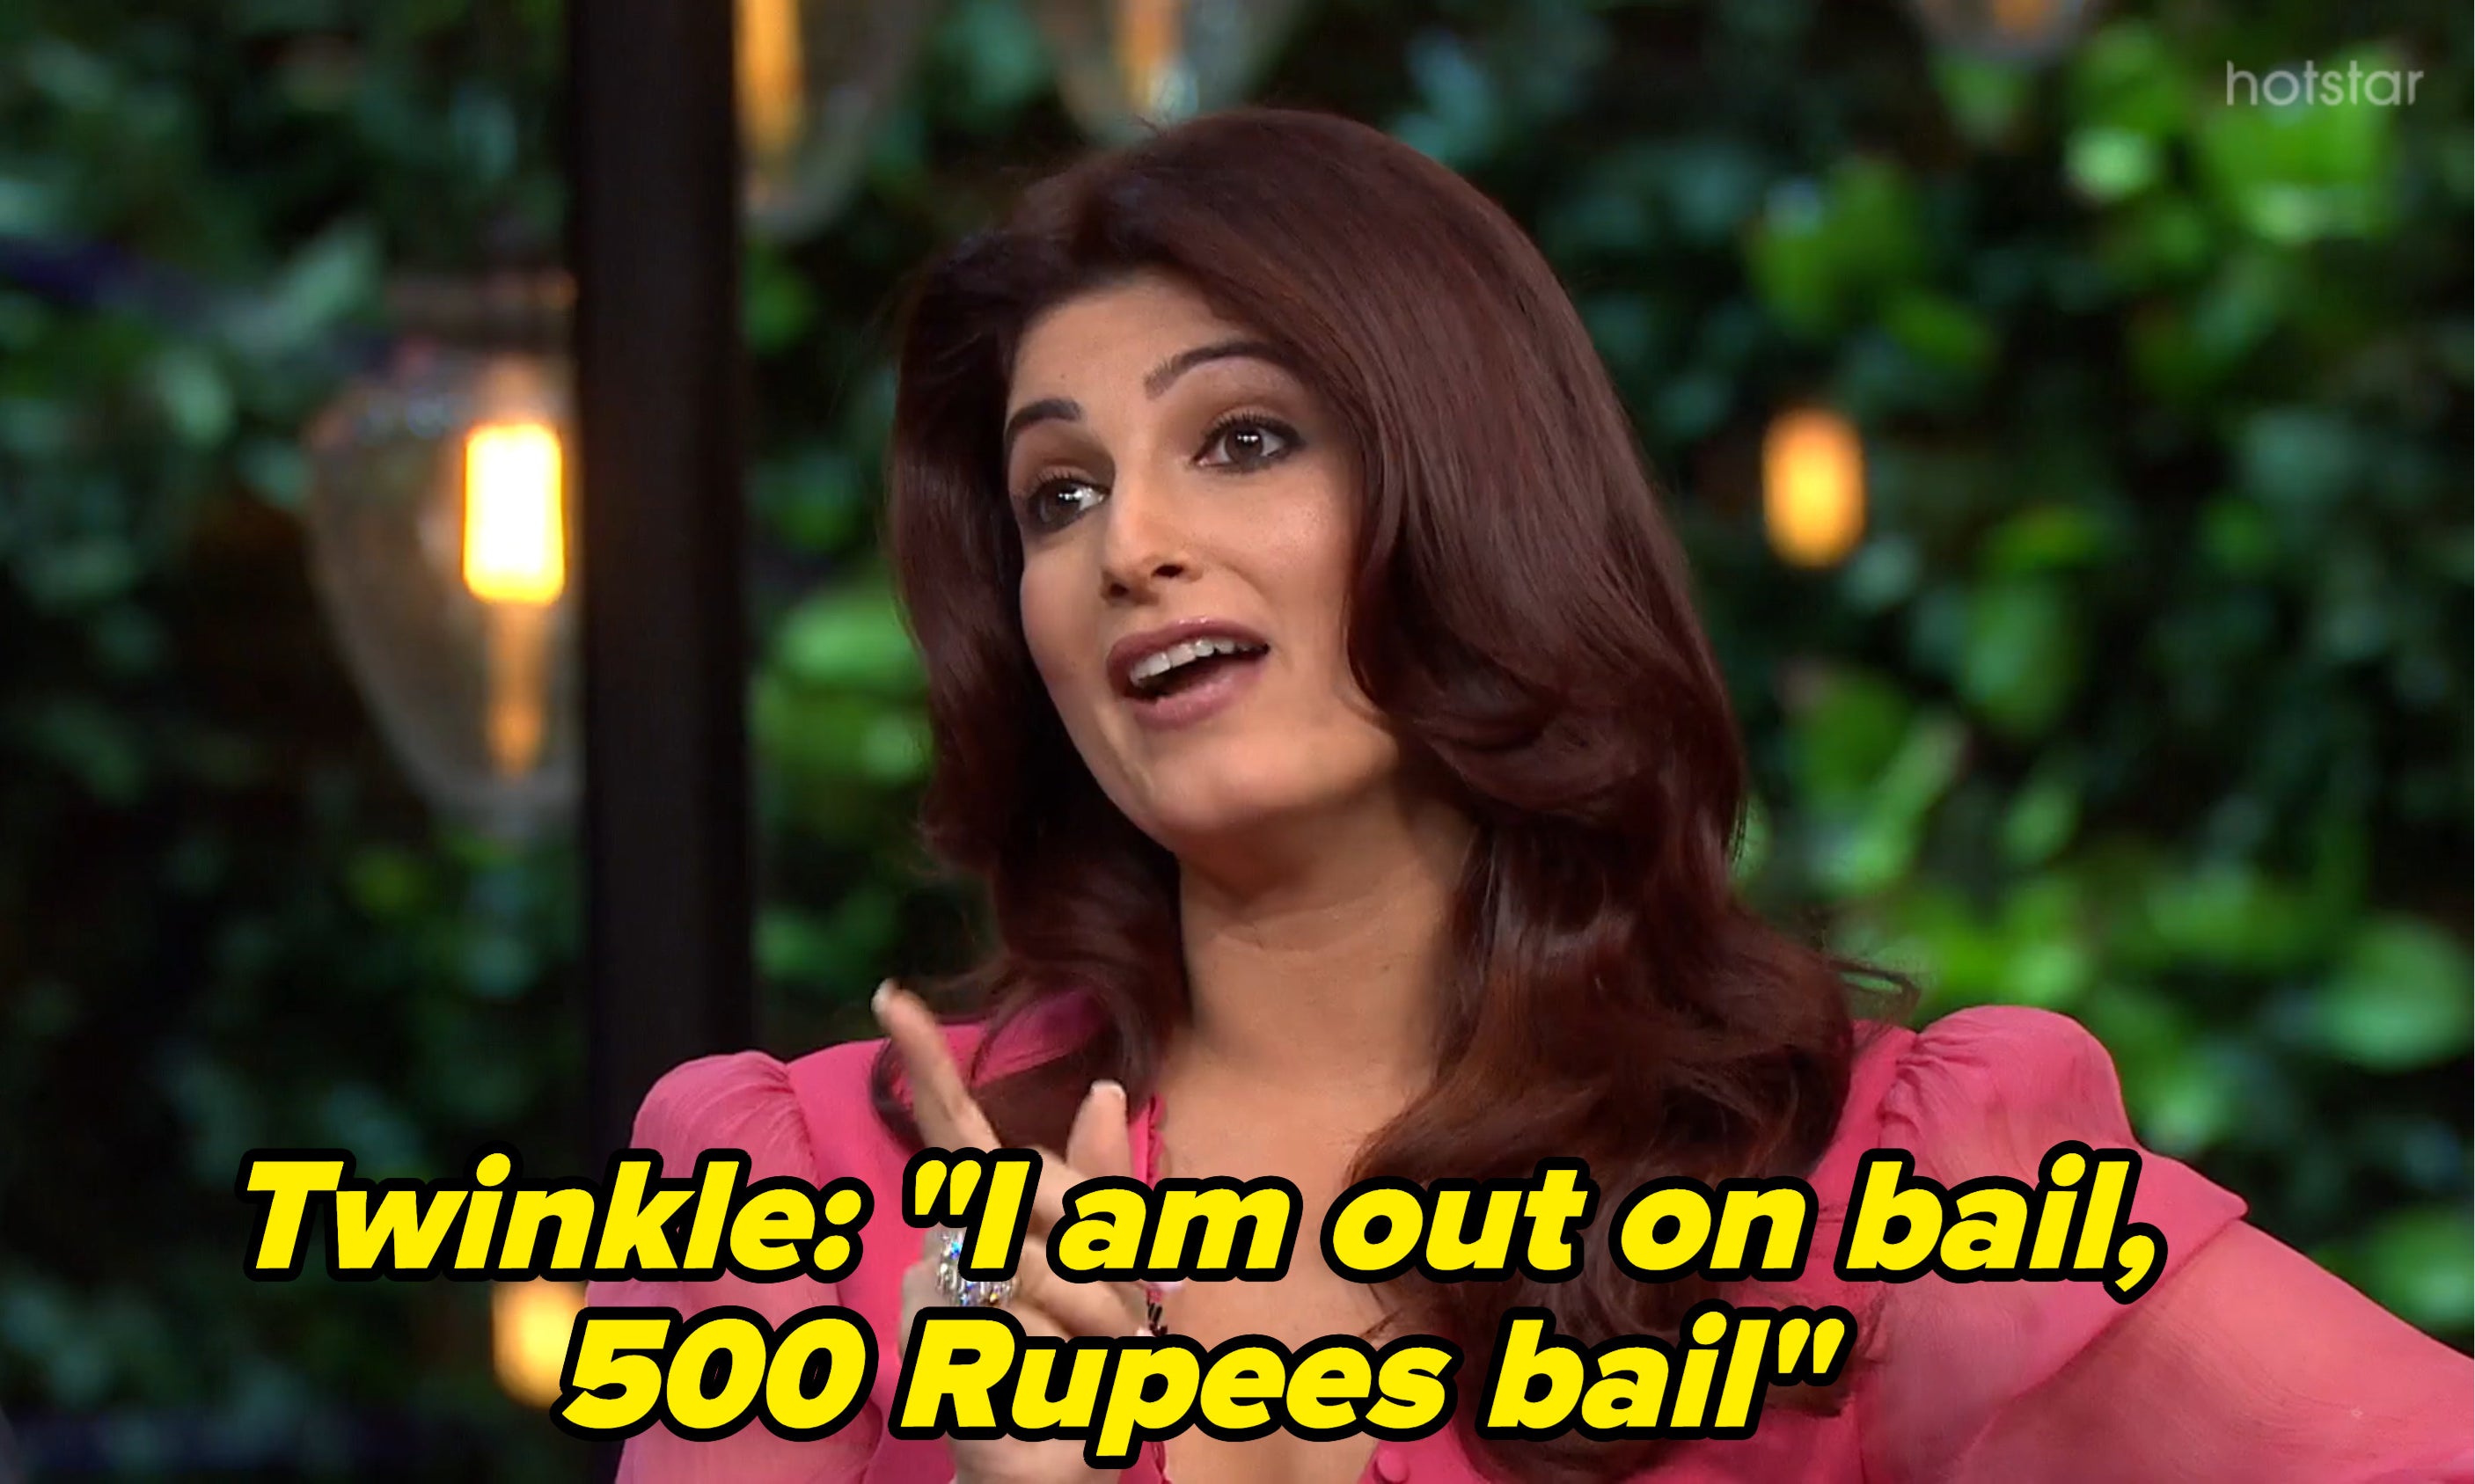 Twinkle Khanna speaking with her finger pointed up